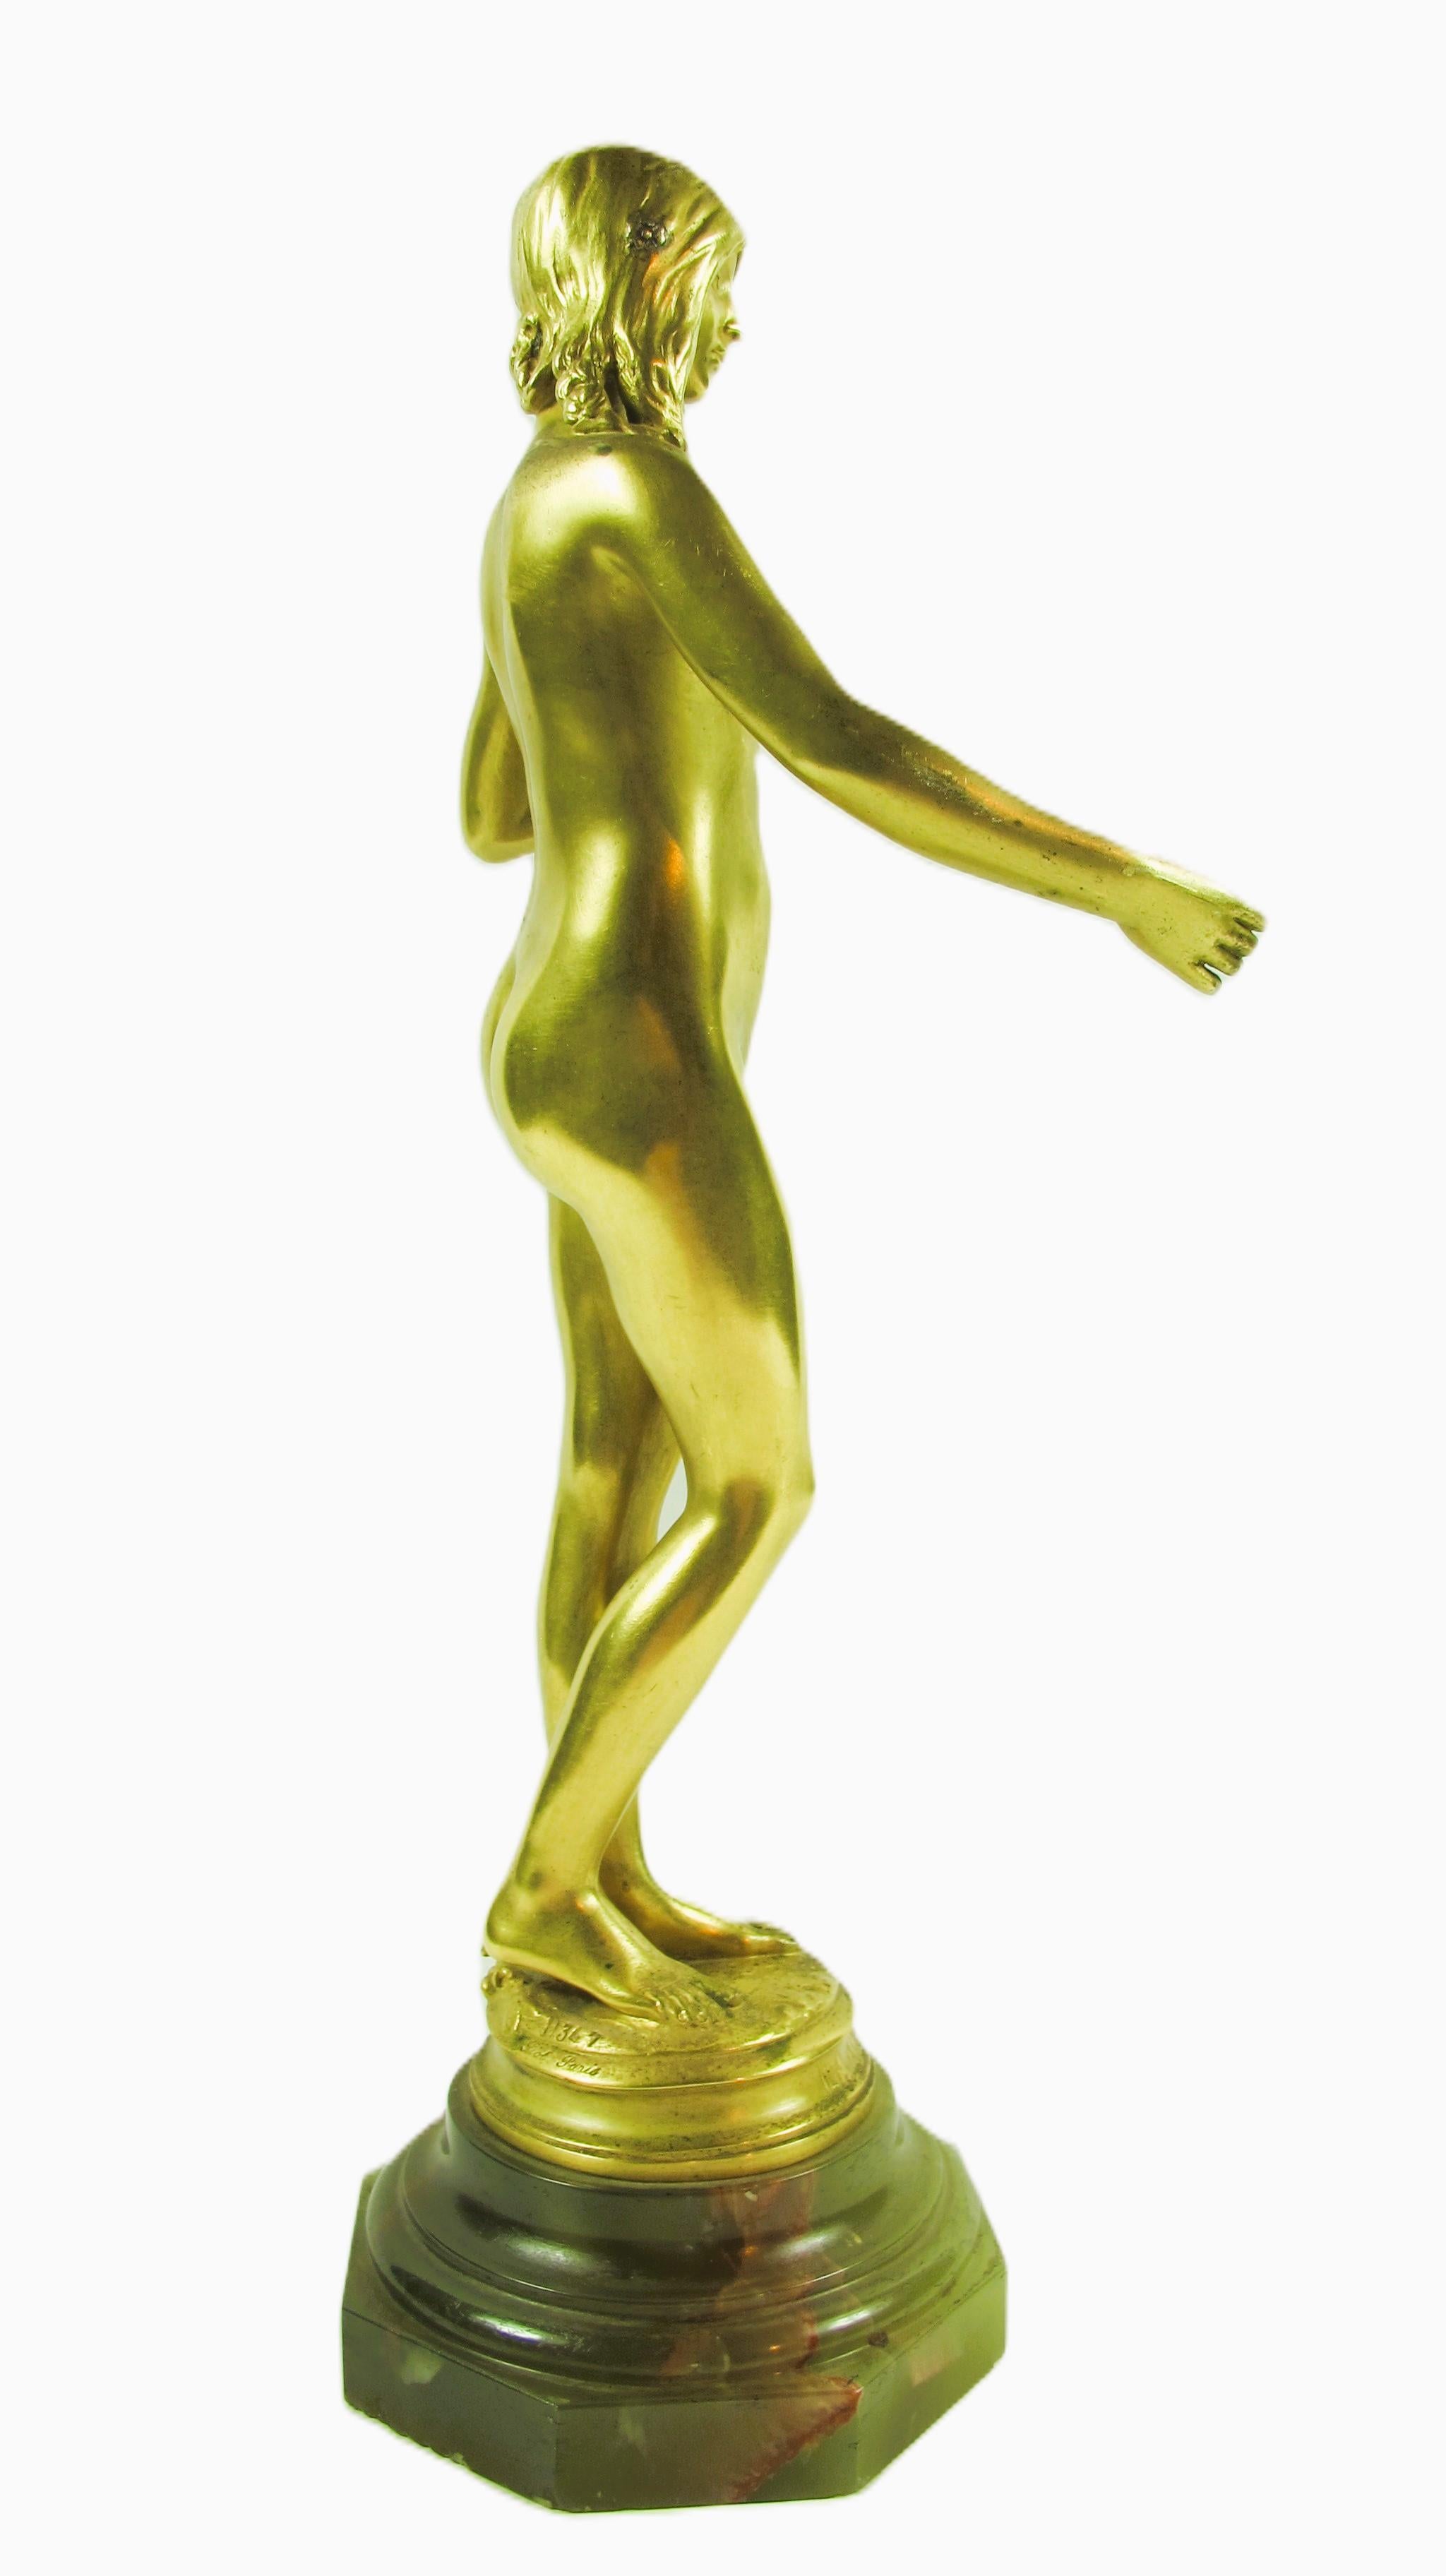 Gilt bronze print representing a naked young woman with a wild rose flower at her feet. Signed on the Antonin Carles terrace and titled “La Jeunesse”. Foundry mark Siot-Decauville Fondeur, Paris and numbered D347. Base in green Algerian onyx marble,